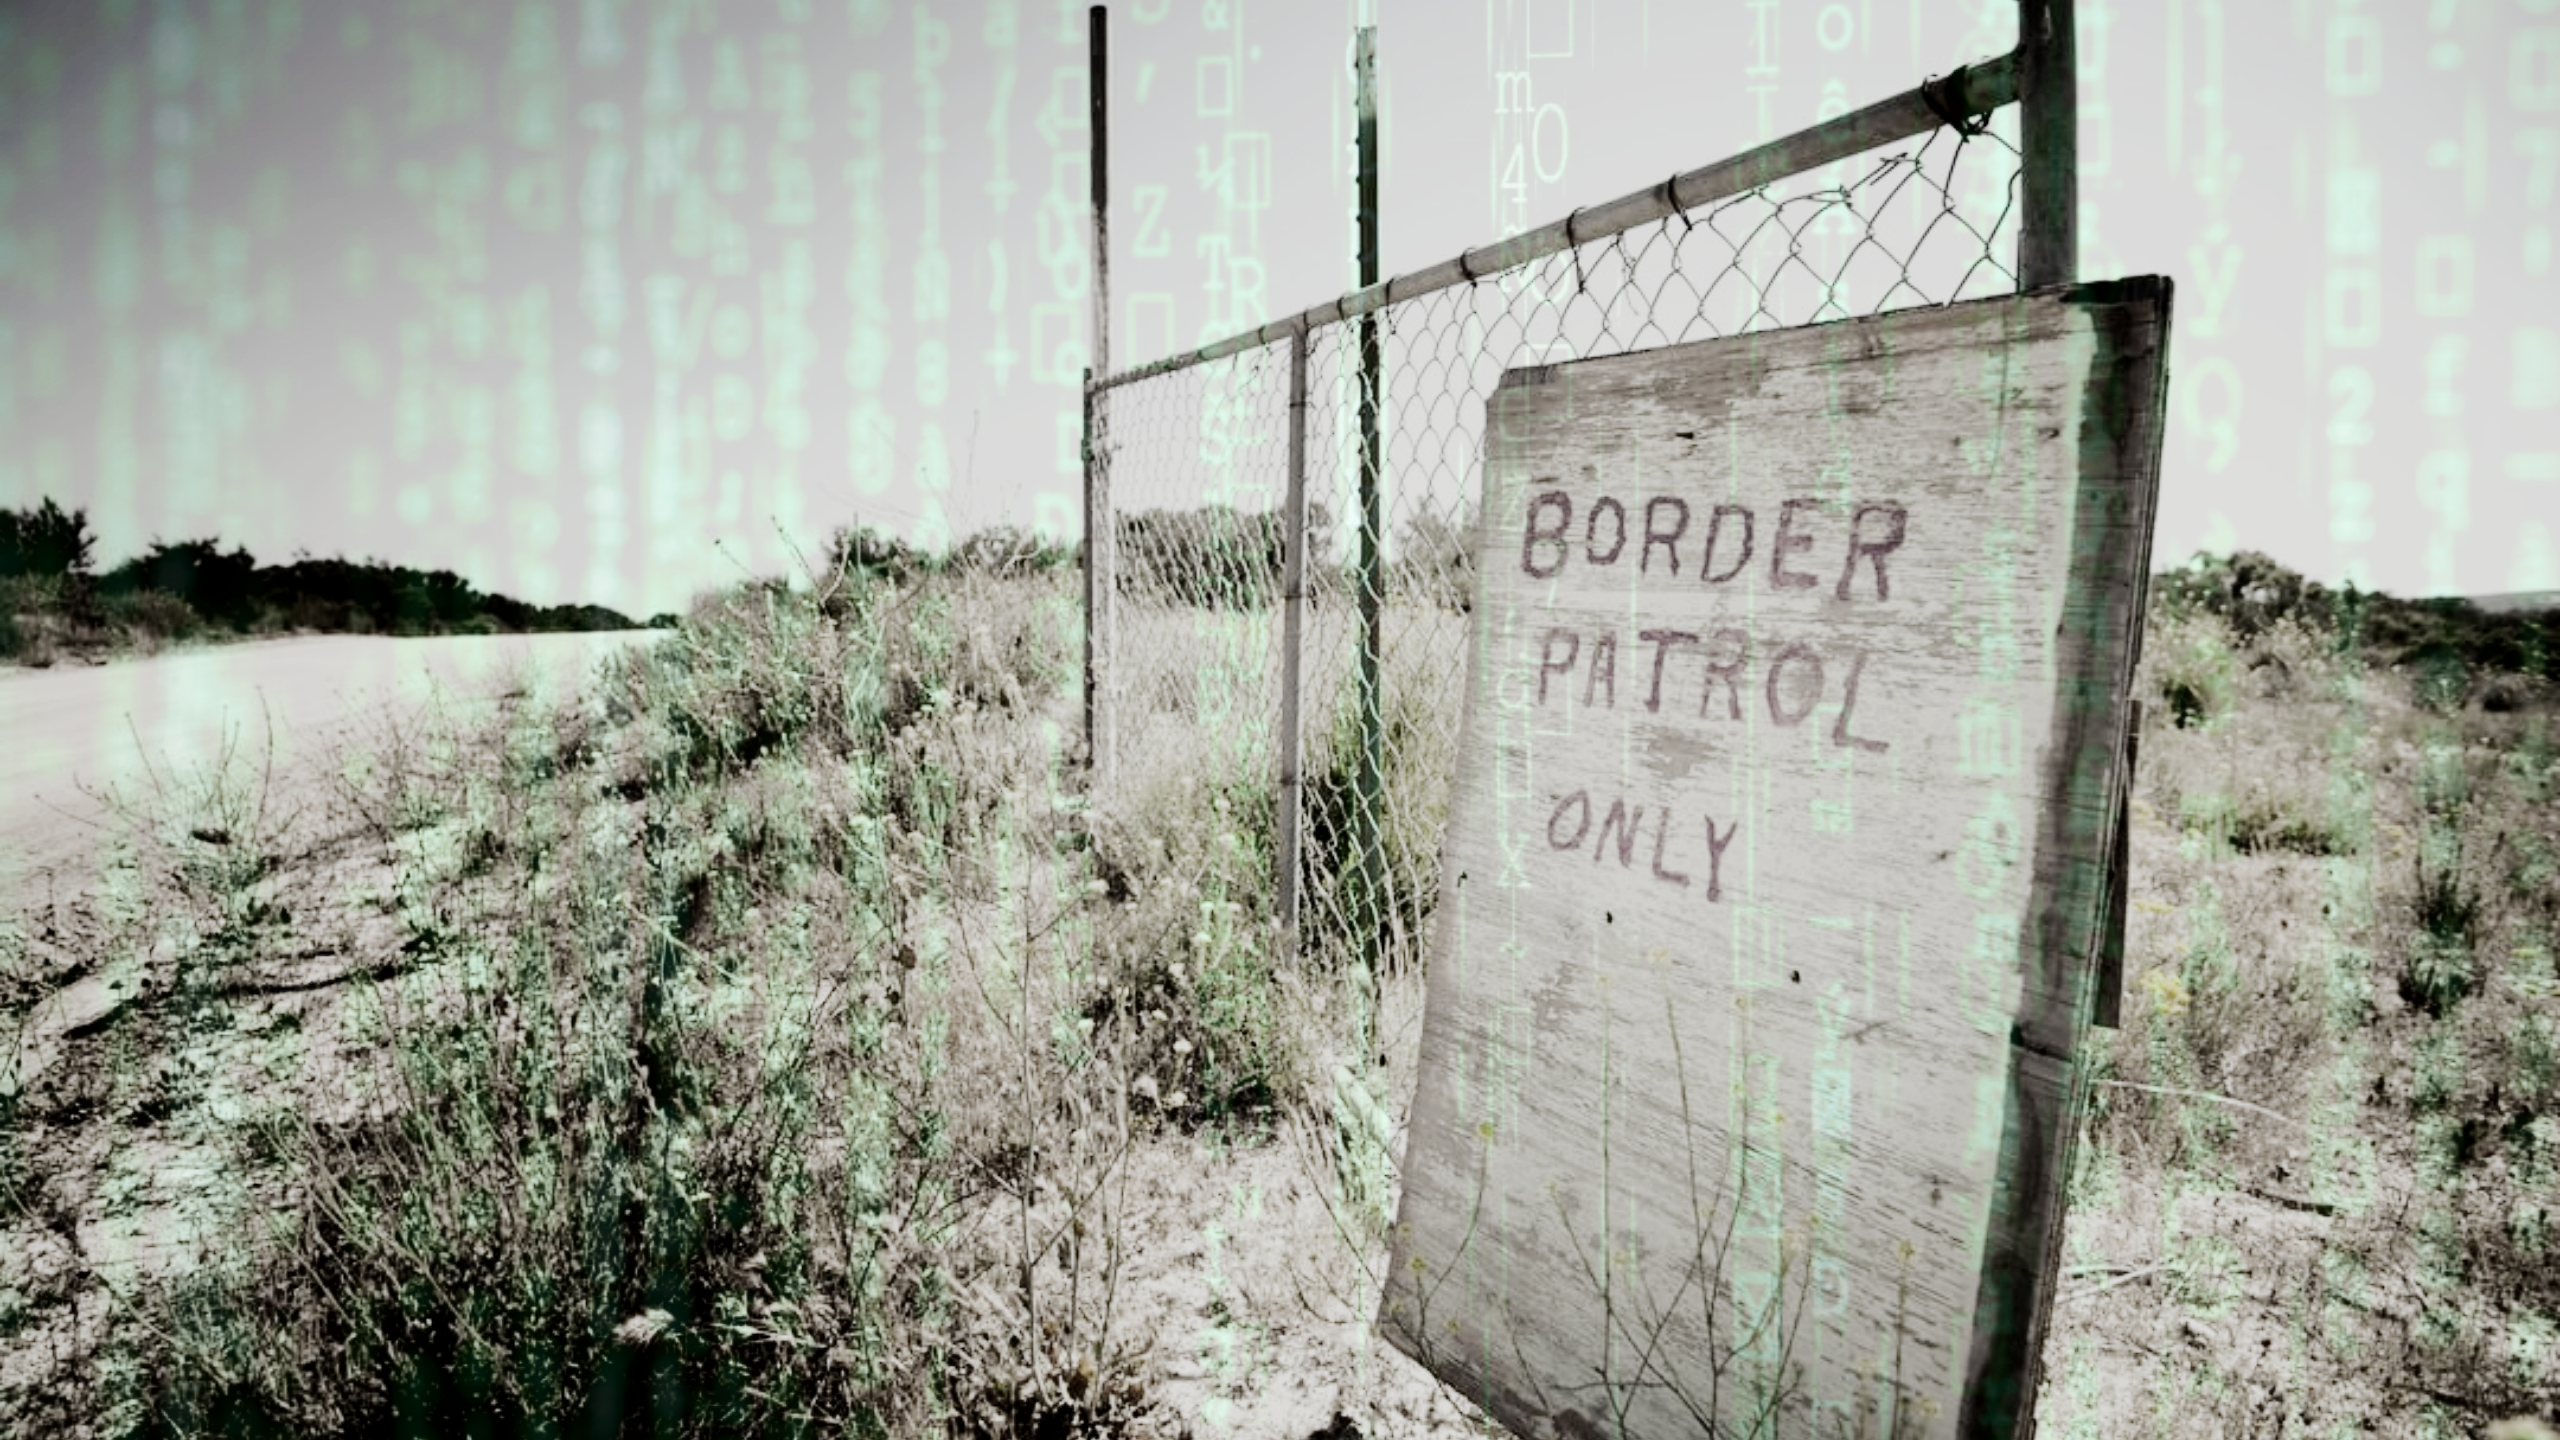 A desolate fence with a sign reading ‘Border Patrol Only’ with green code overlay